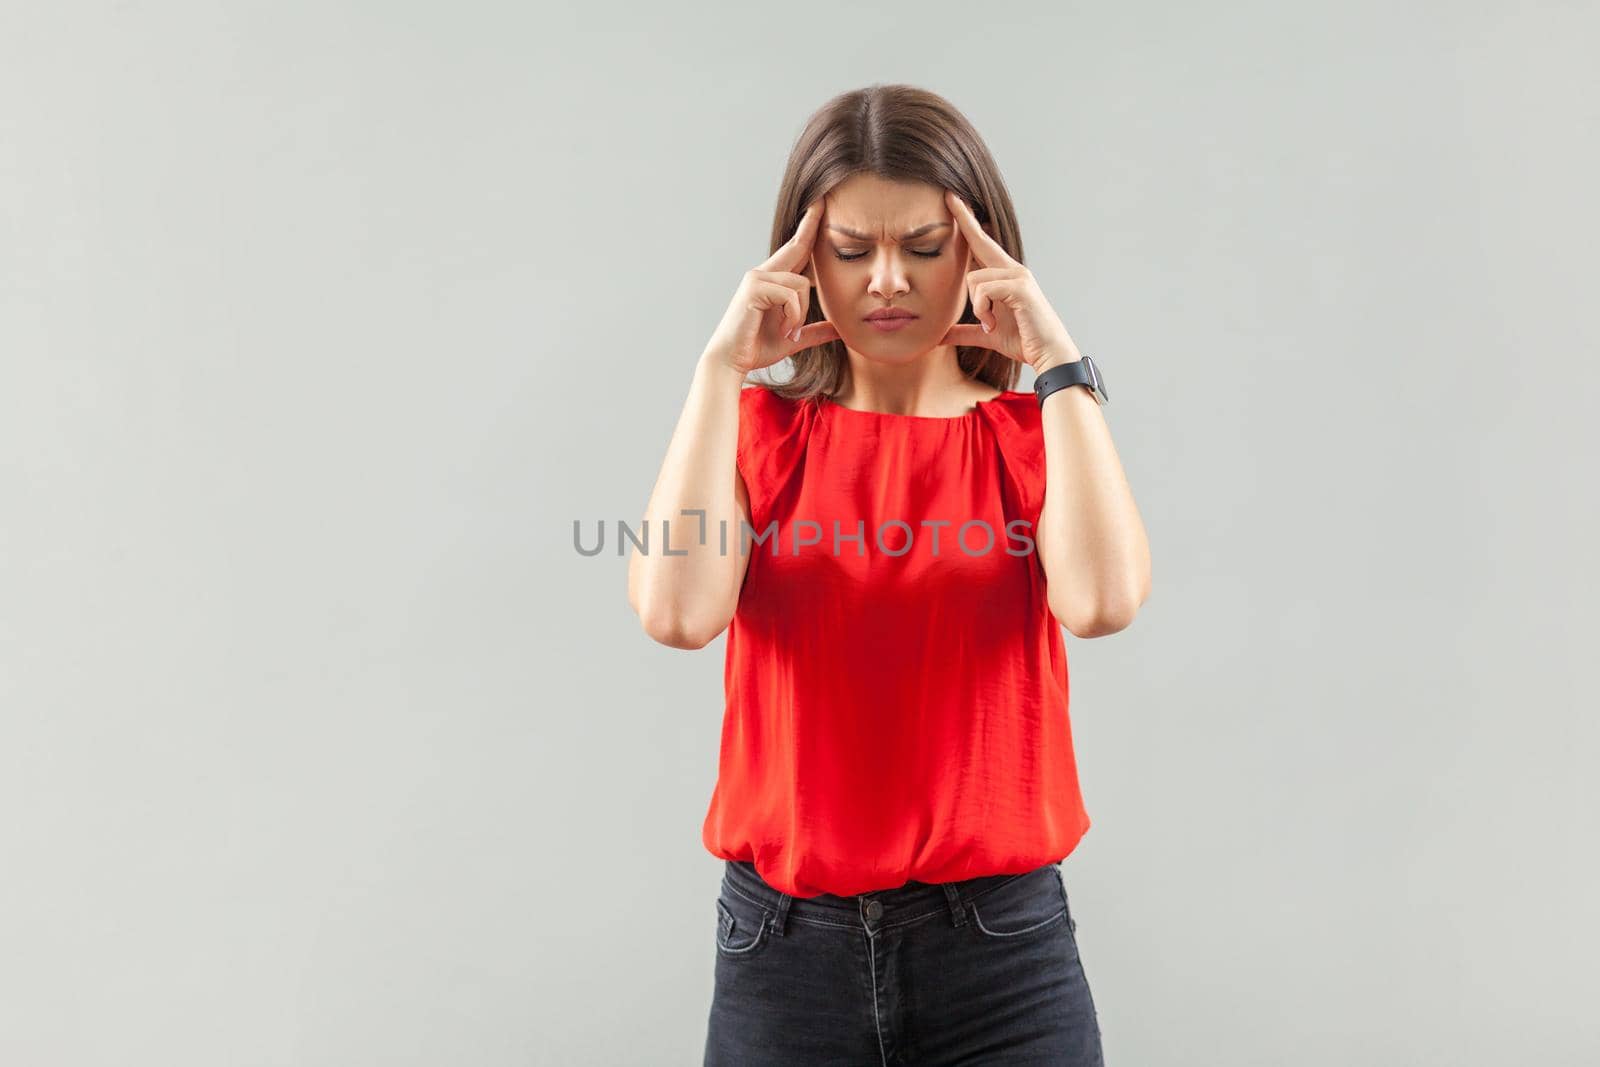 Headache, confution or thinking. Portrait of serious beautiful brunette young woman in red shirt standing and holding her painful head. indoor, studio shot, isolated on gray background.